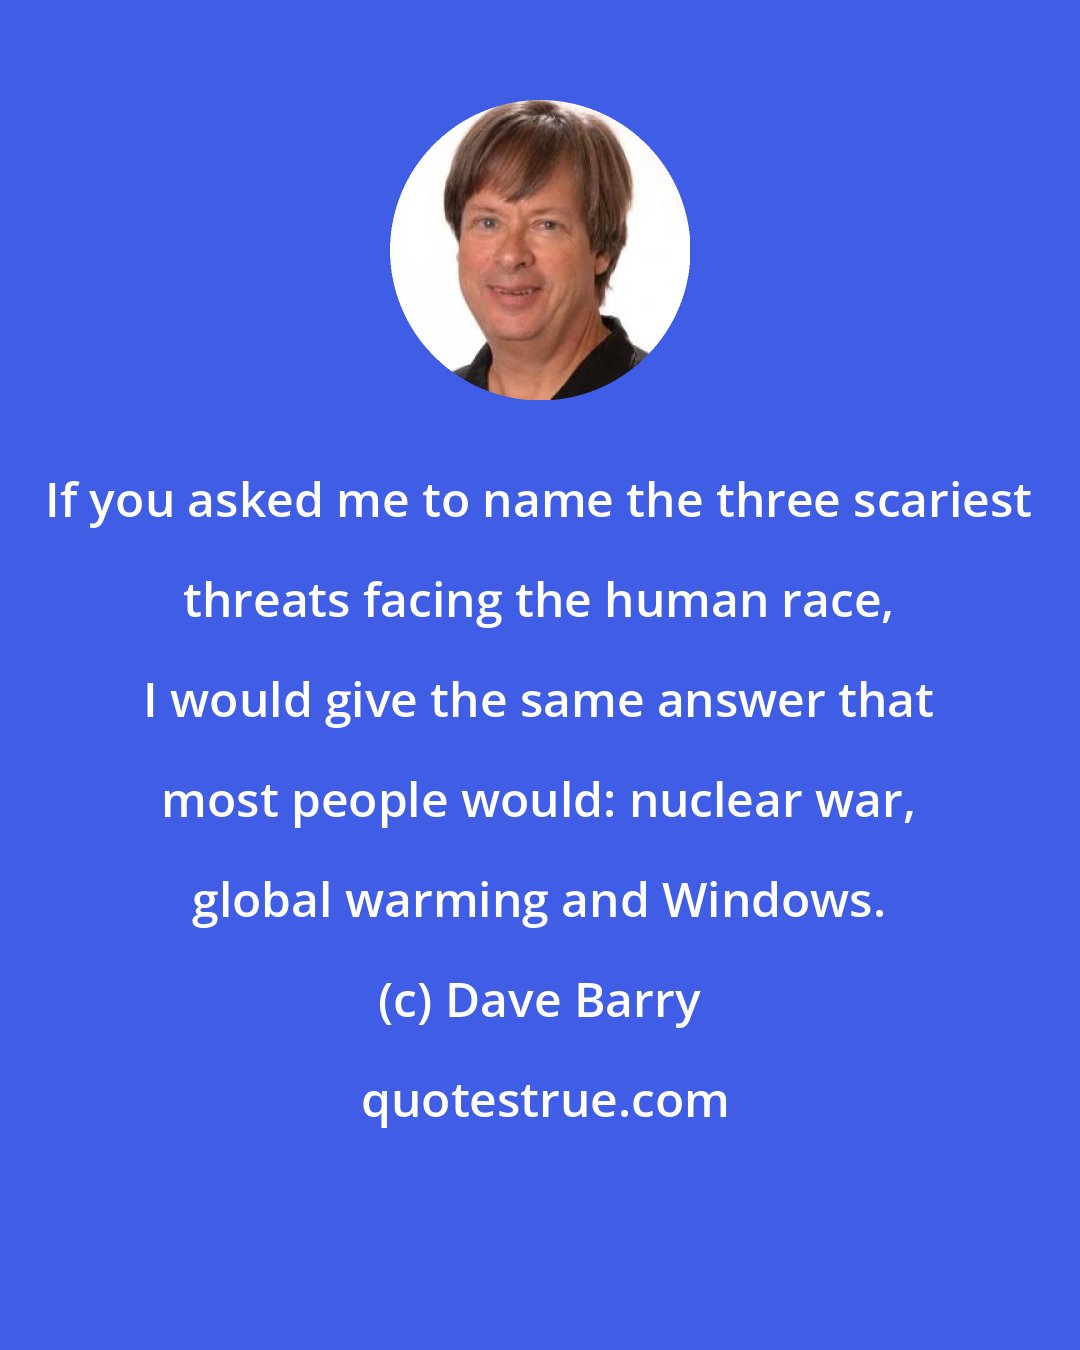 Dave Barry: If you asked me to name the three scariest threats facing the human race, I would give the same answer that most people would: nuclear war, global warming and Windows.